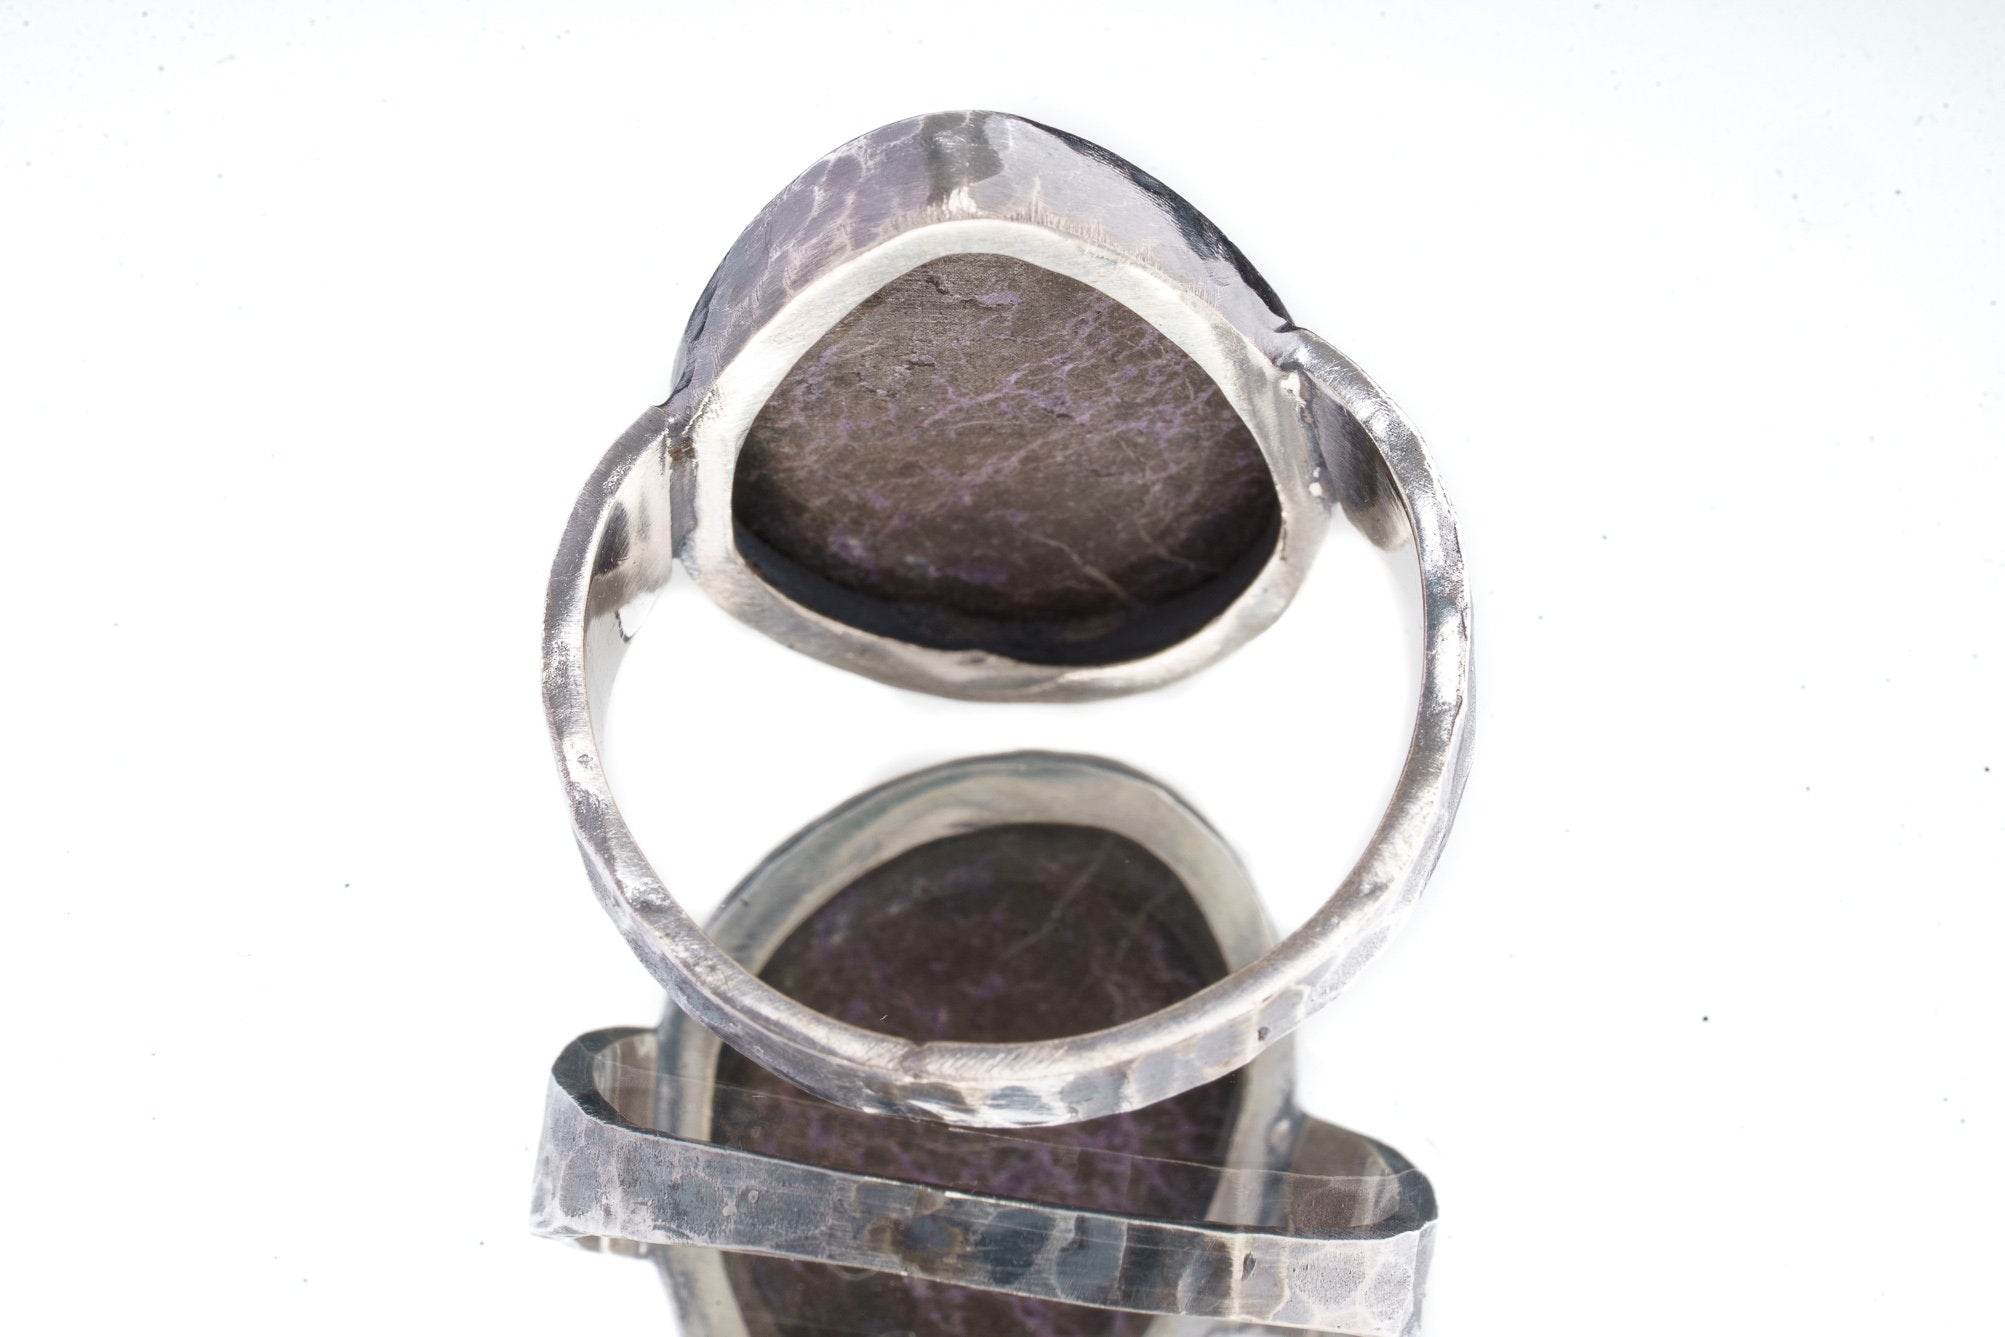 Unique Big Sugilite Cabochon - Men's / Unisex Large Crystal Ring - Size 13 1/2 US - 925 Sterling Silver - Hammer Textured & Oxidised